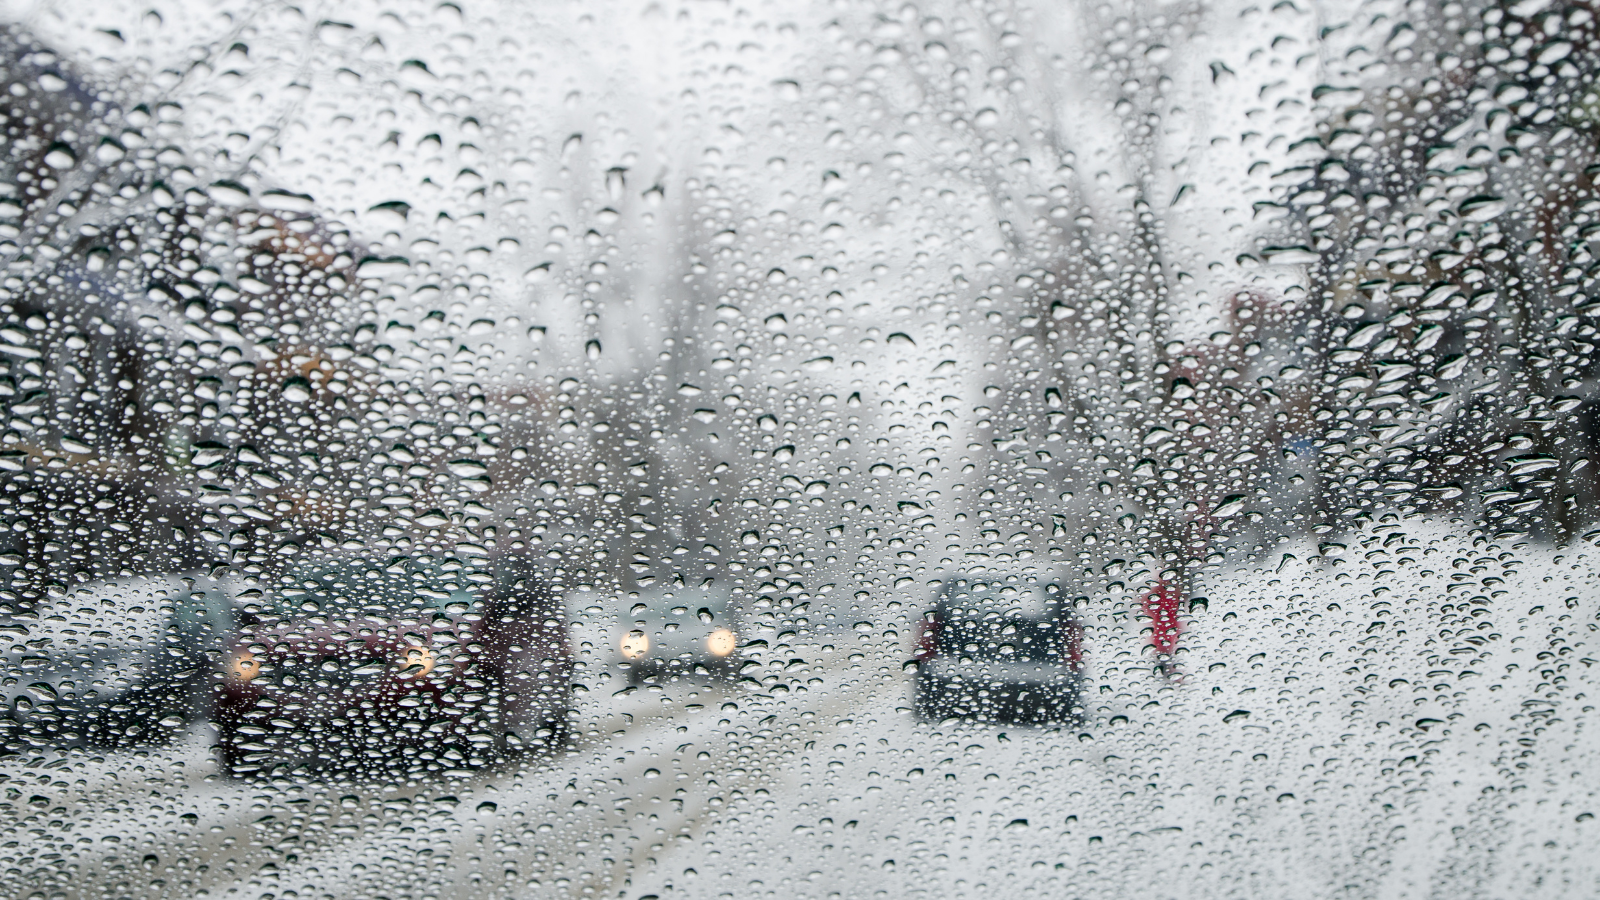 Blurry image through a frosted and rain-soaked window of a street with parked cars. The setting is snowy and bleak.